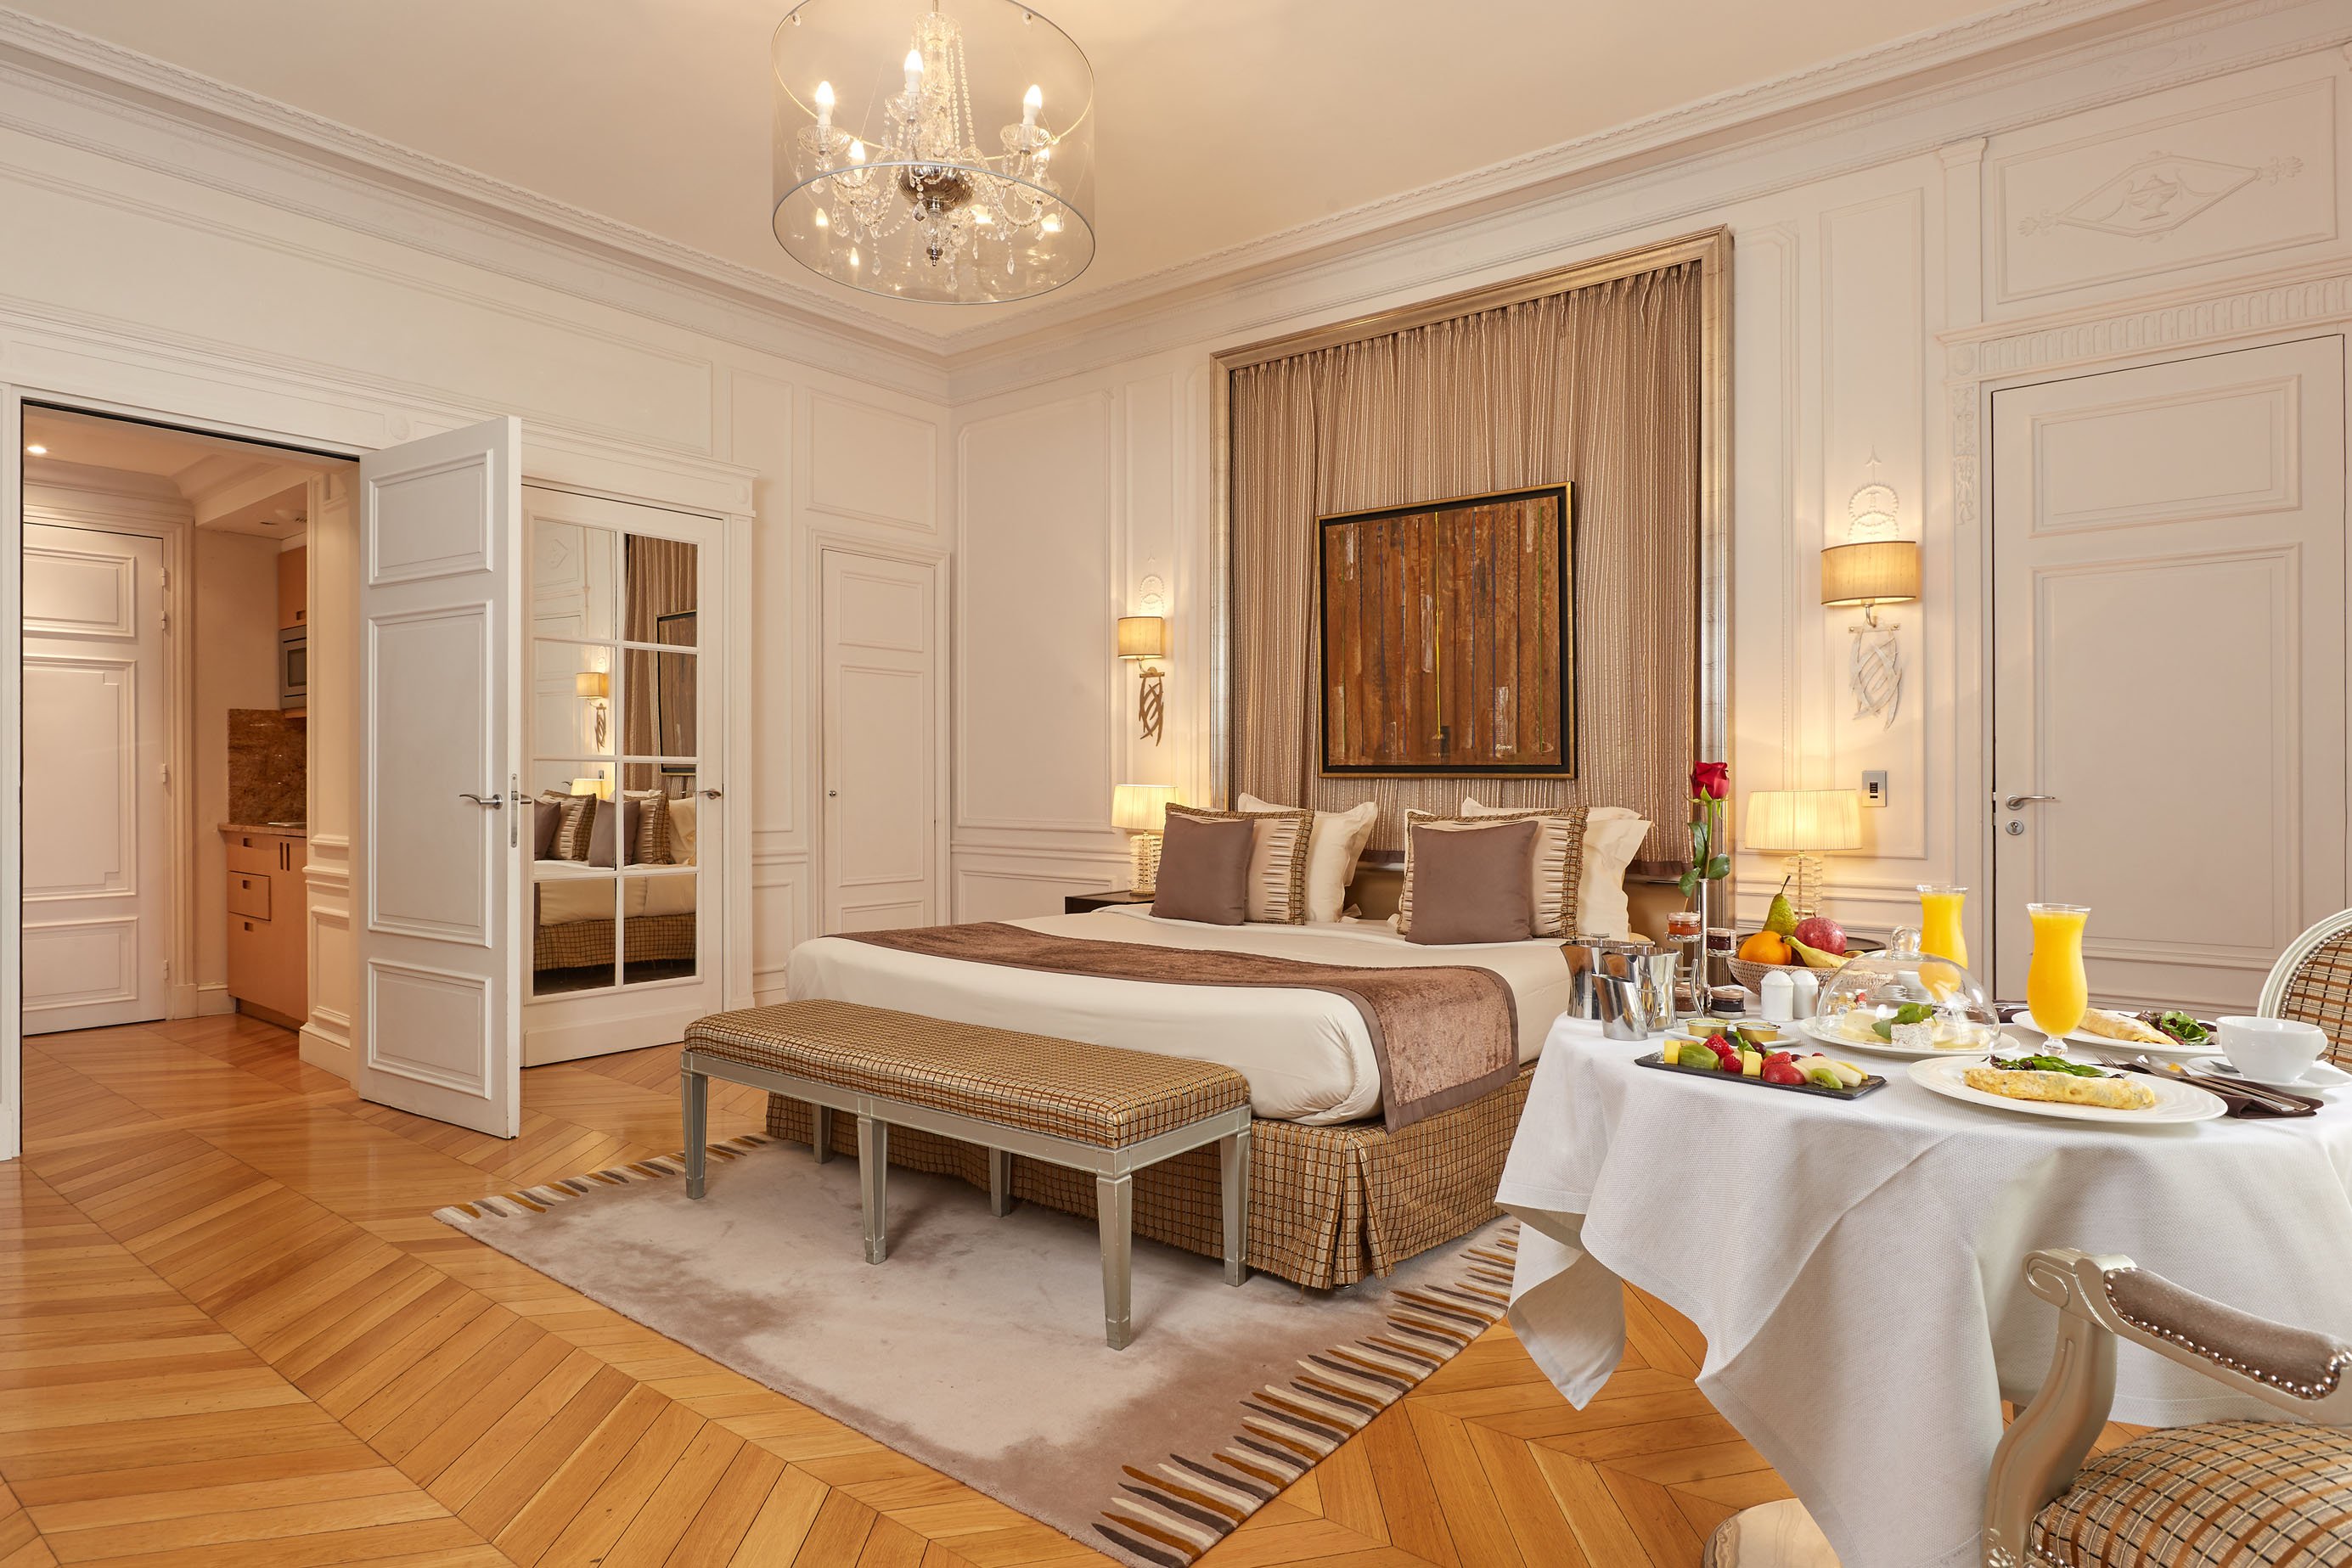 260/Rooms/Grand deluxe/Room_Grand_Deluxe_1_CMajestic_Hotel-Spa.jpg